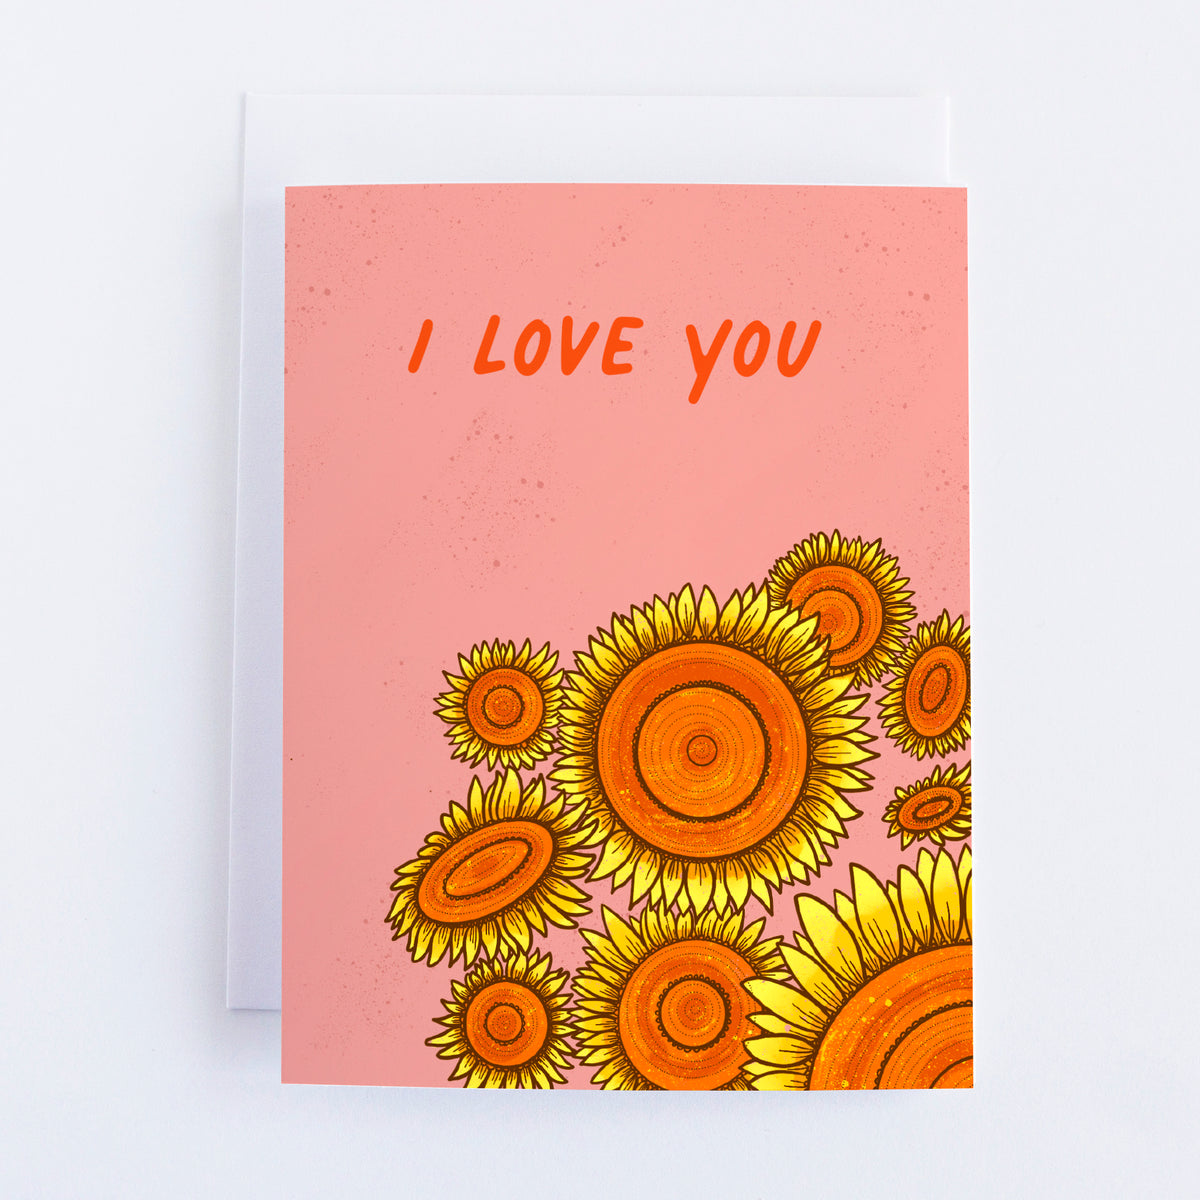 A pink greeting card with 9 sunflowers in the bottom right quadrant and I Love You in the top half of the card.